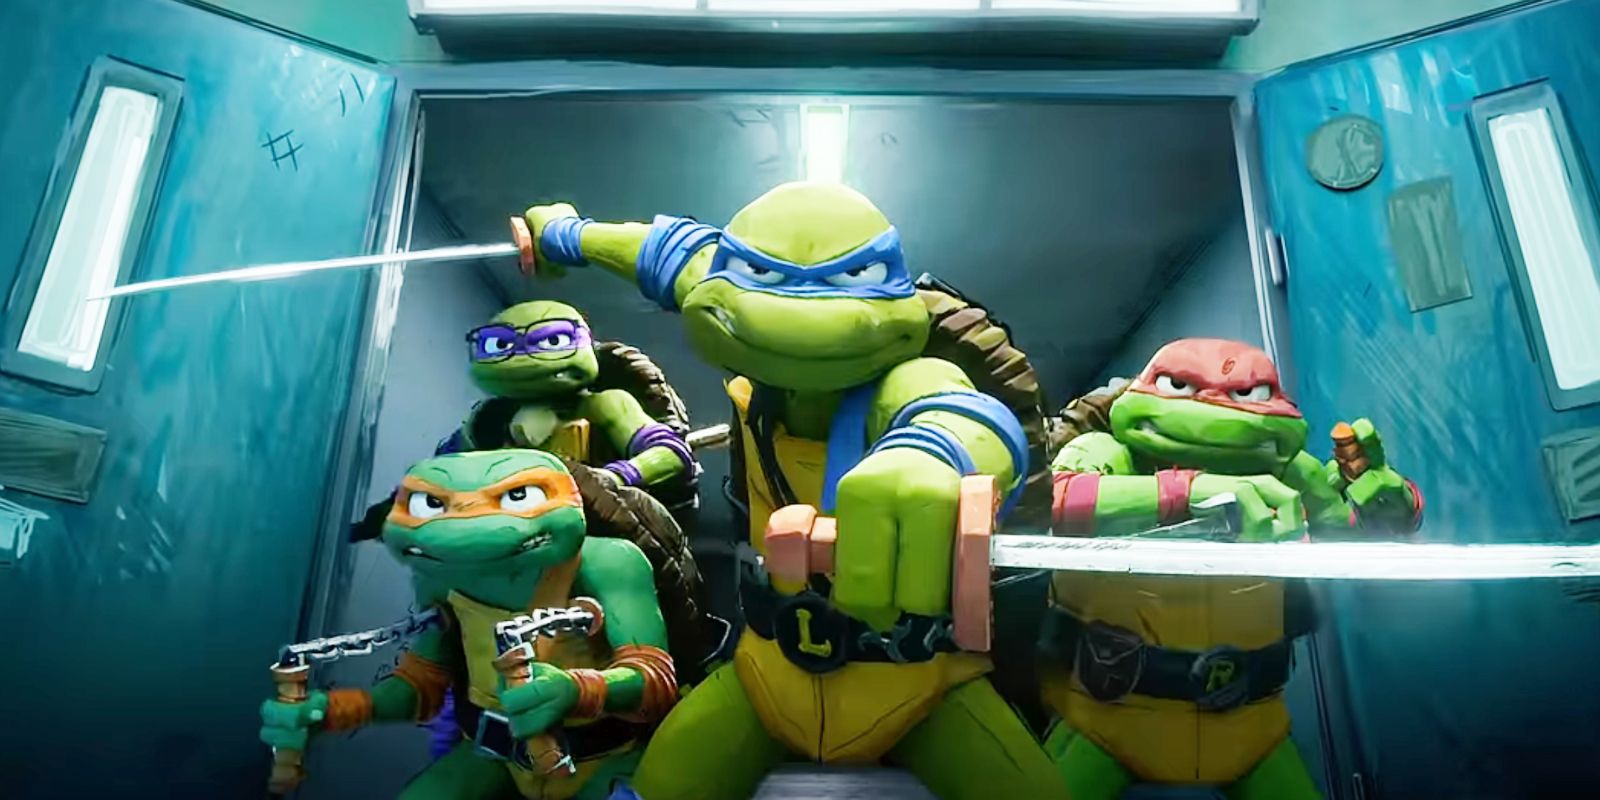 The Teenage Mutant Ninja Turtles standing together, holding their weapons, and ready for combat in TMNT: Mutant Mayhem